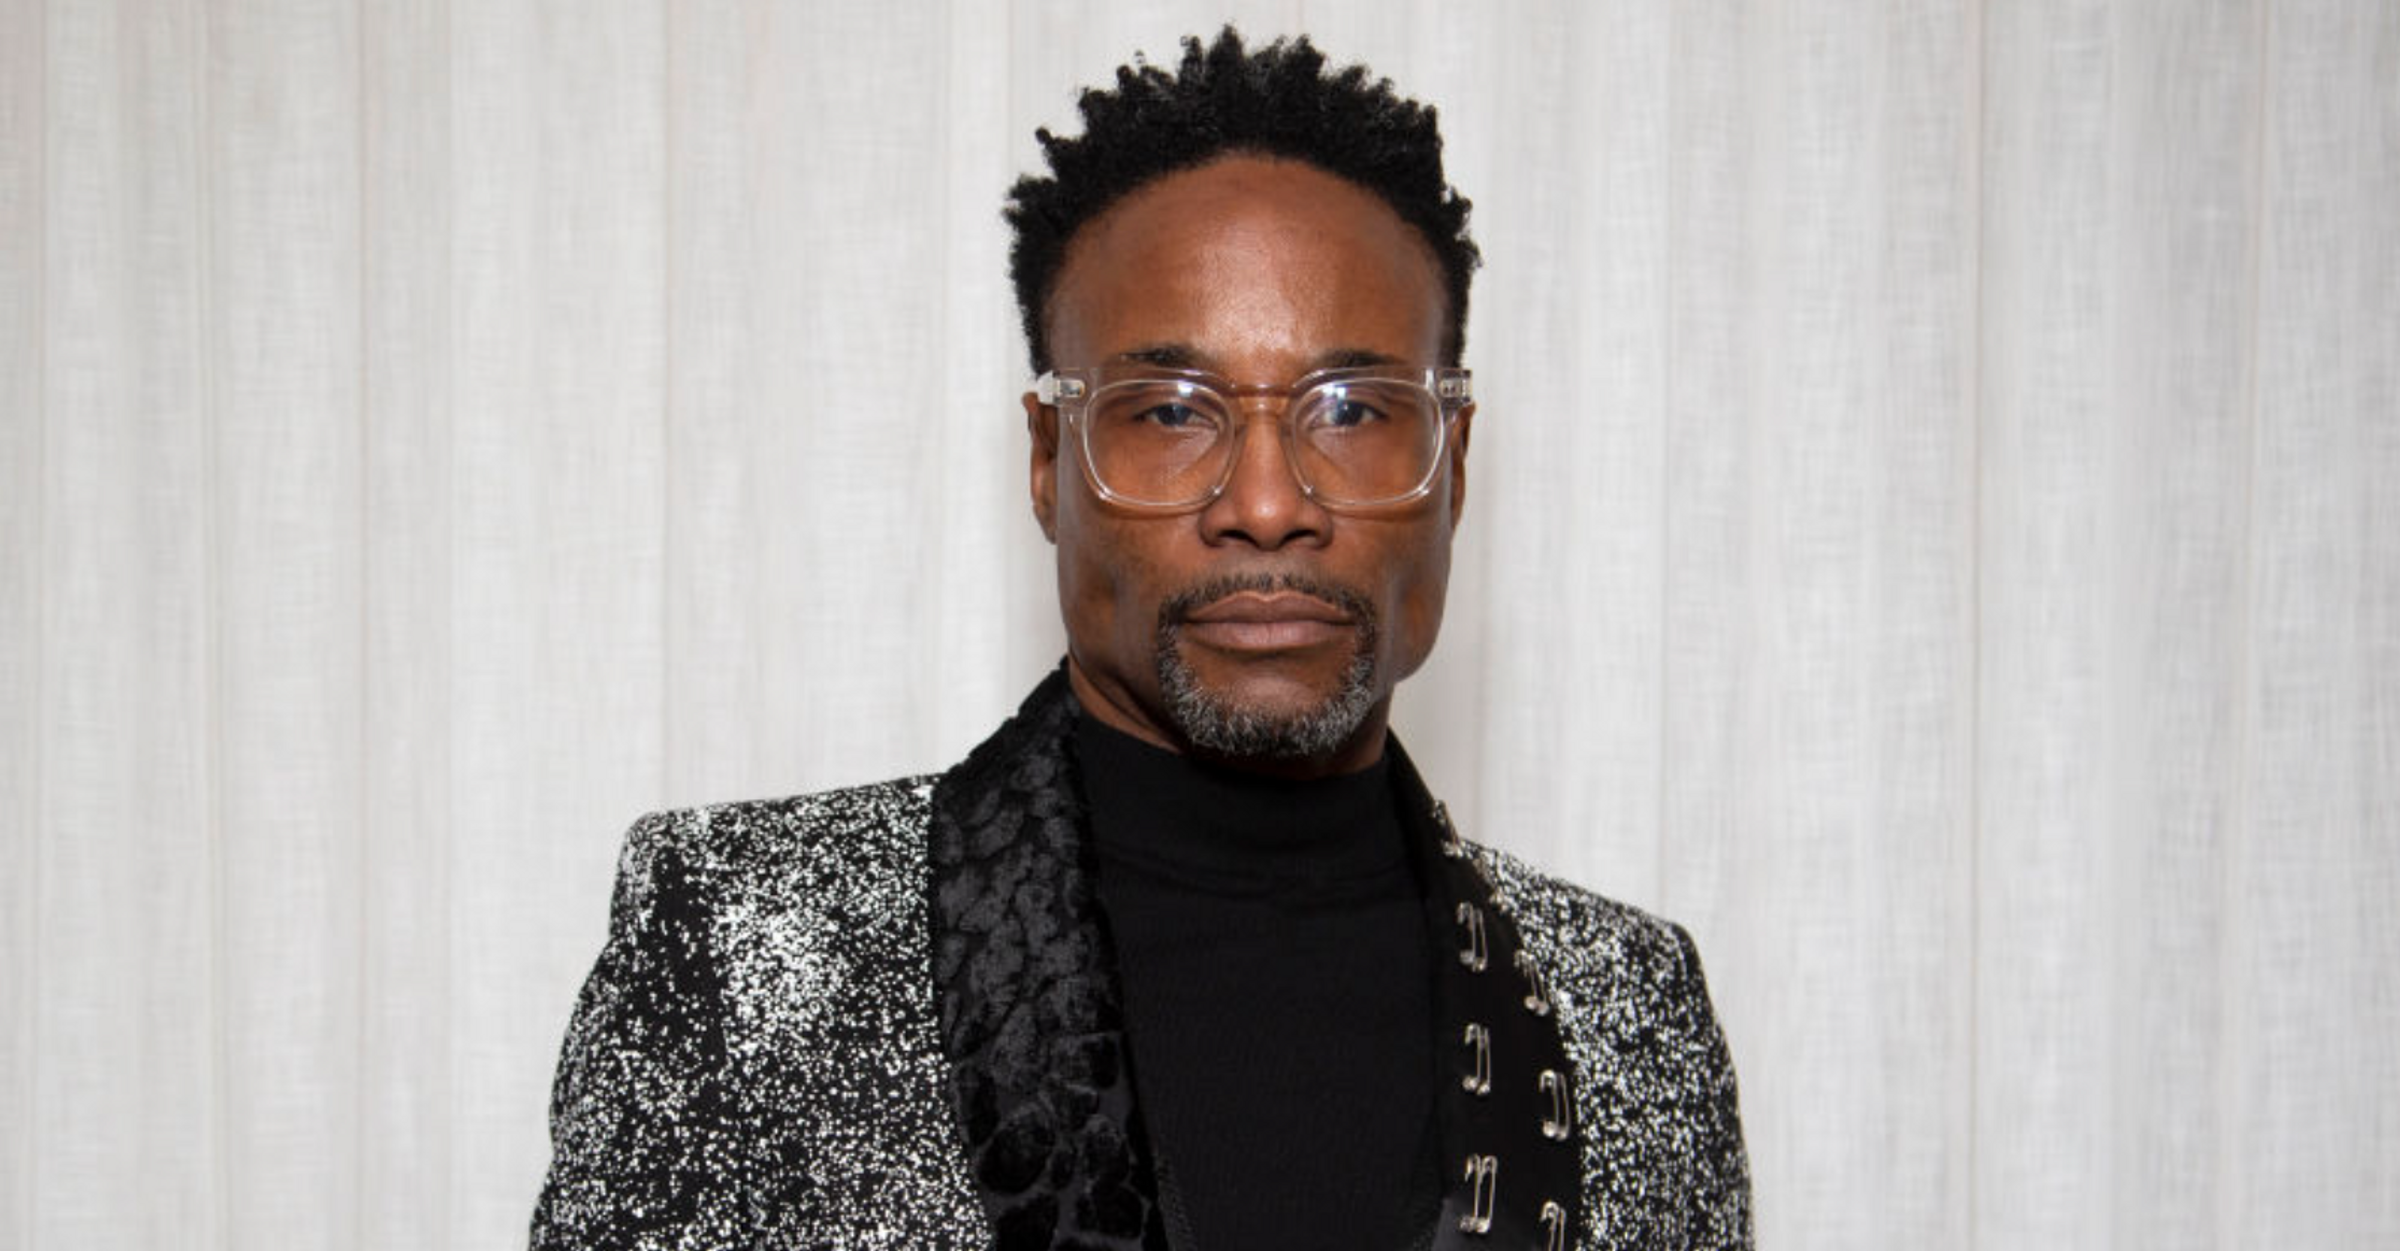 Billy Porter Reveals He Has To Sell His House To Make Ends Meet During Hollywood Strikes (comicsands.com)